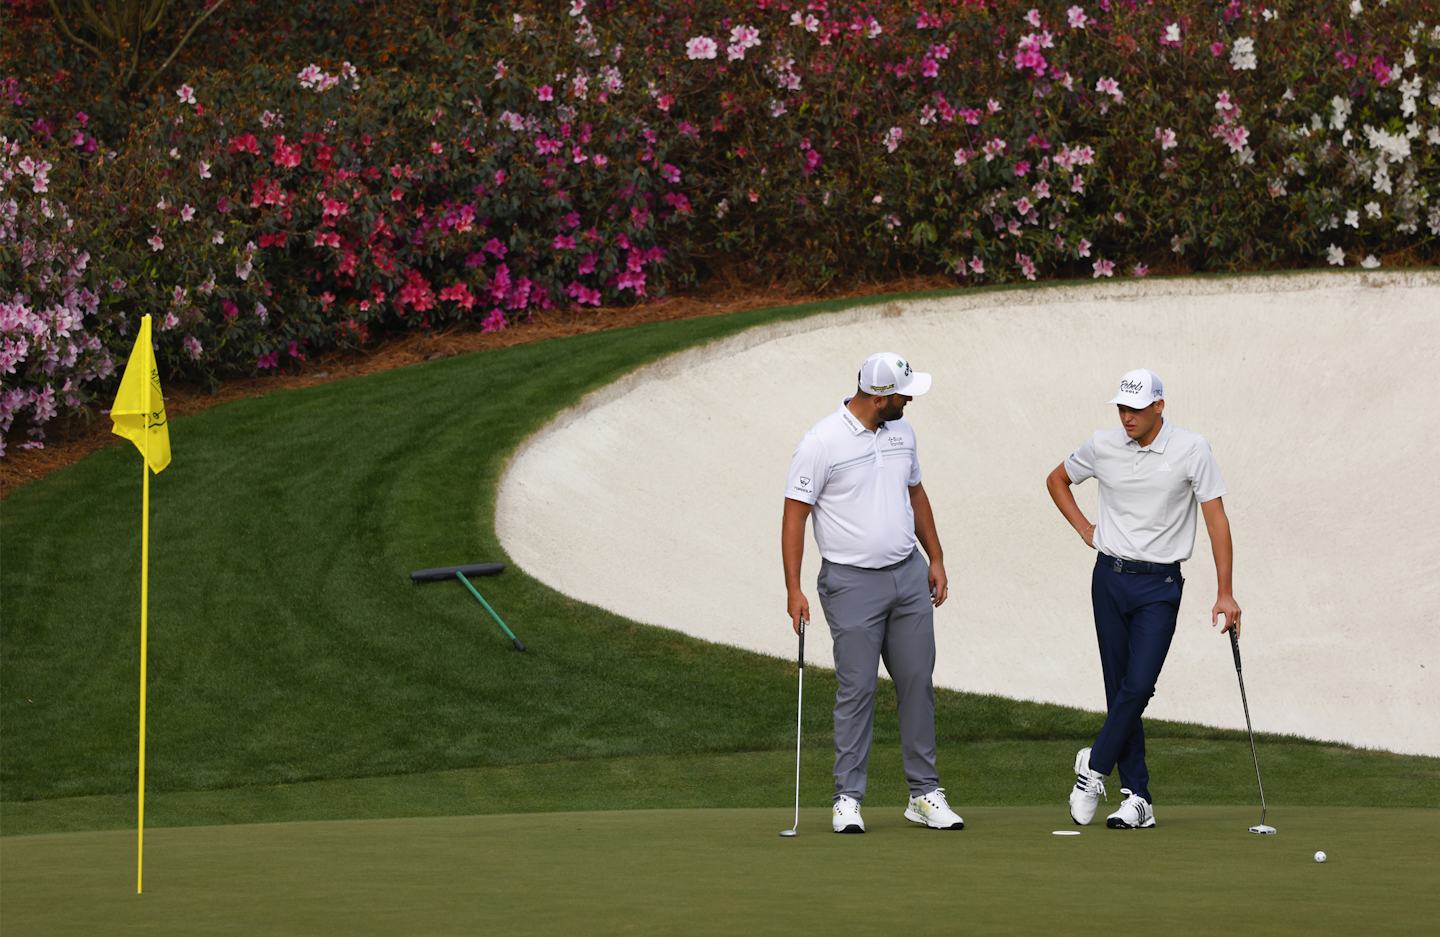 Amateur Aaron Jarvis of Cayman Islands (R) and Jon Rahm of Spain (L) talk on the No. 13 hole during practice round 2 for the Masters at Augusta National Golf Club, Tuesday, April 5, 2022.